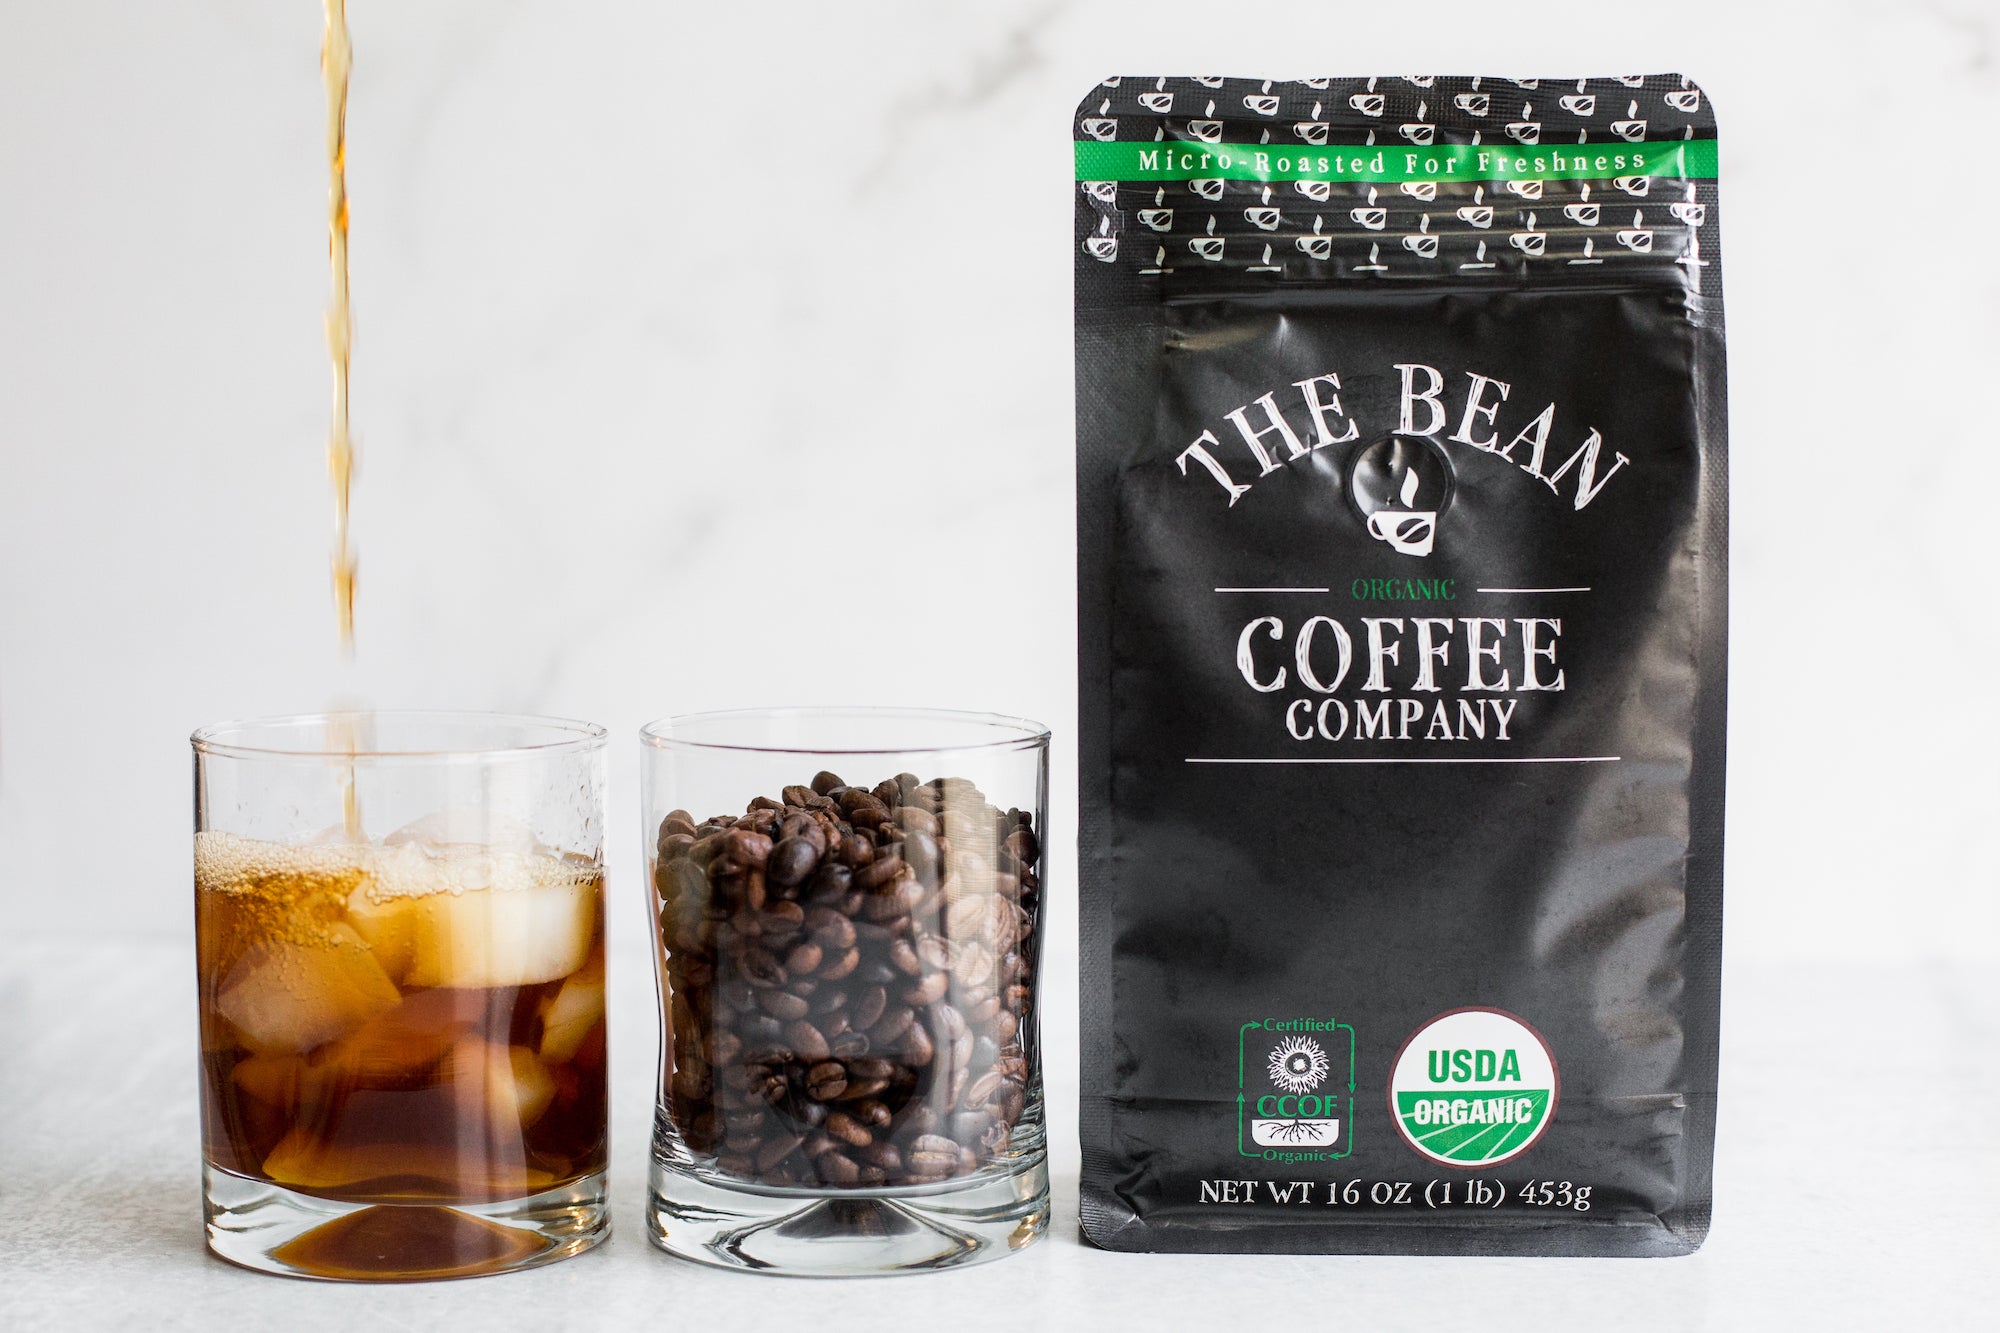 4 Tips to Make Iced Coffee Even Better